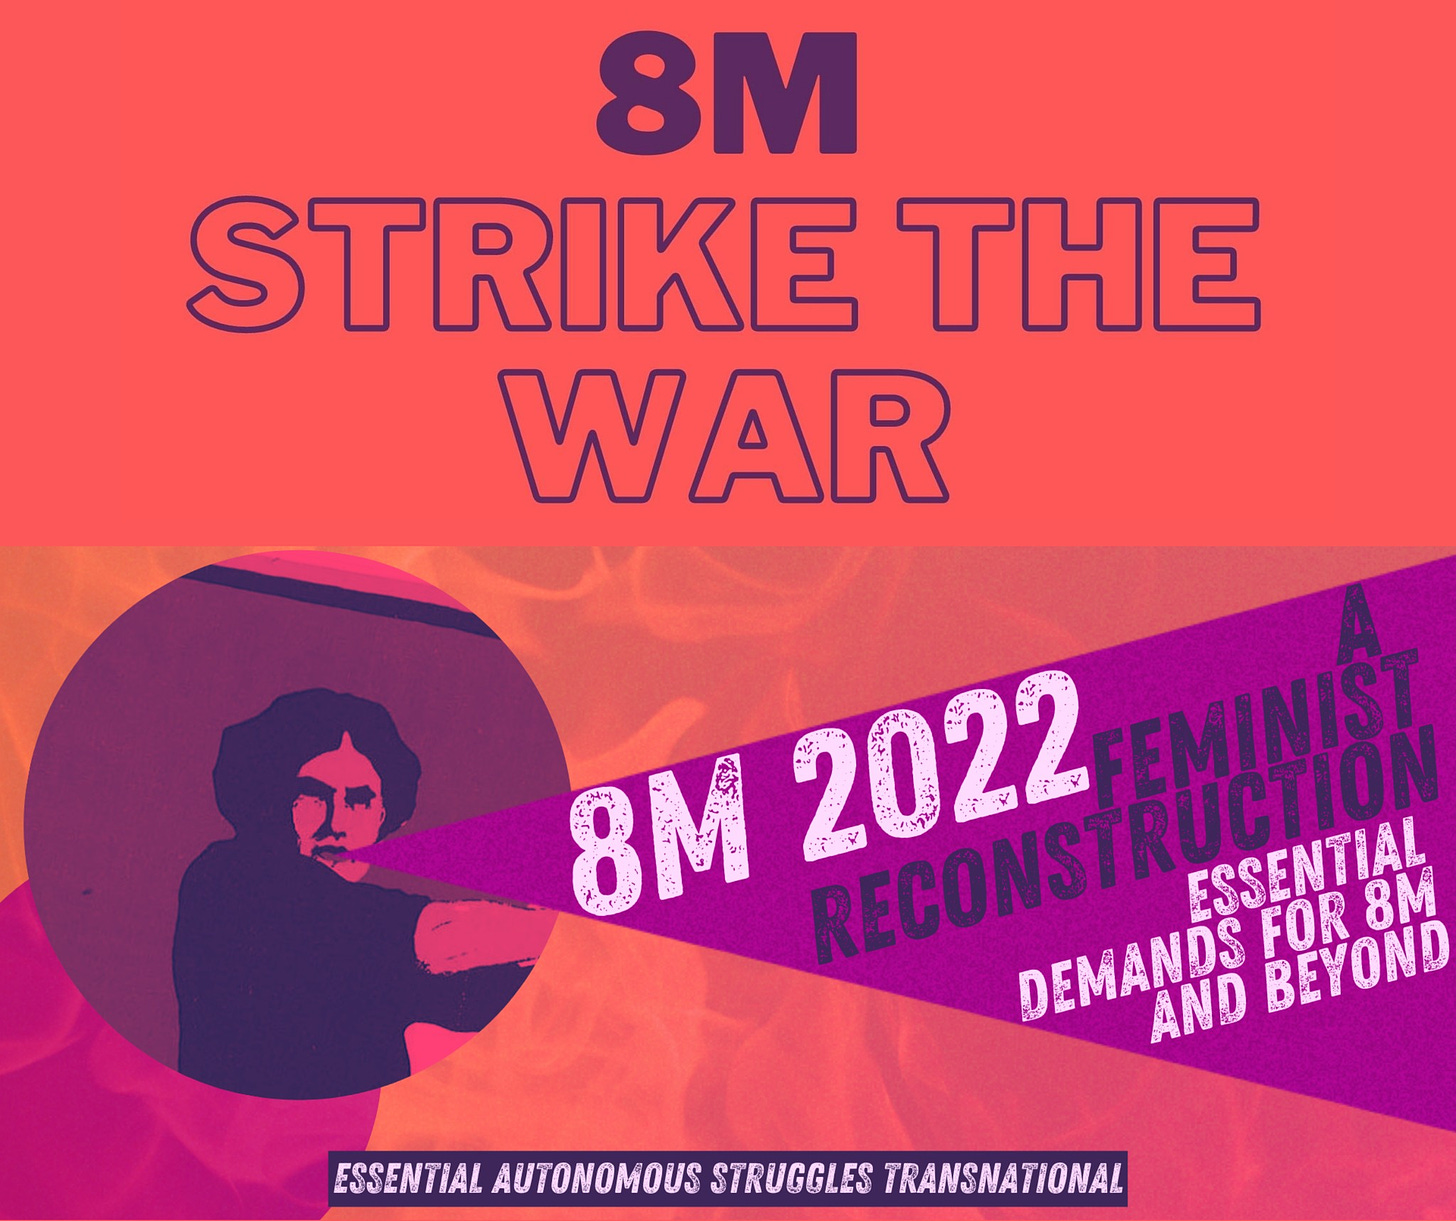 May be an image of text that says '8M STRIKE THE WAR FEMINIST 8M REORSTM FOR DEMANDS AND ESSENTIAL AUTONOMOUS STRUGGLES TRANSNATIONAL'